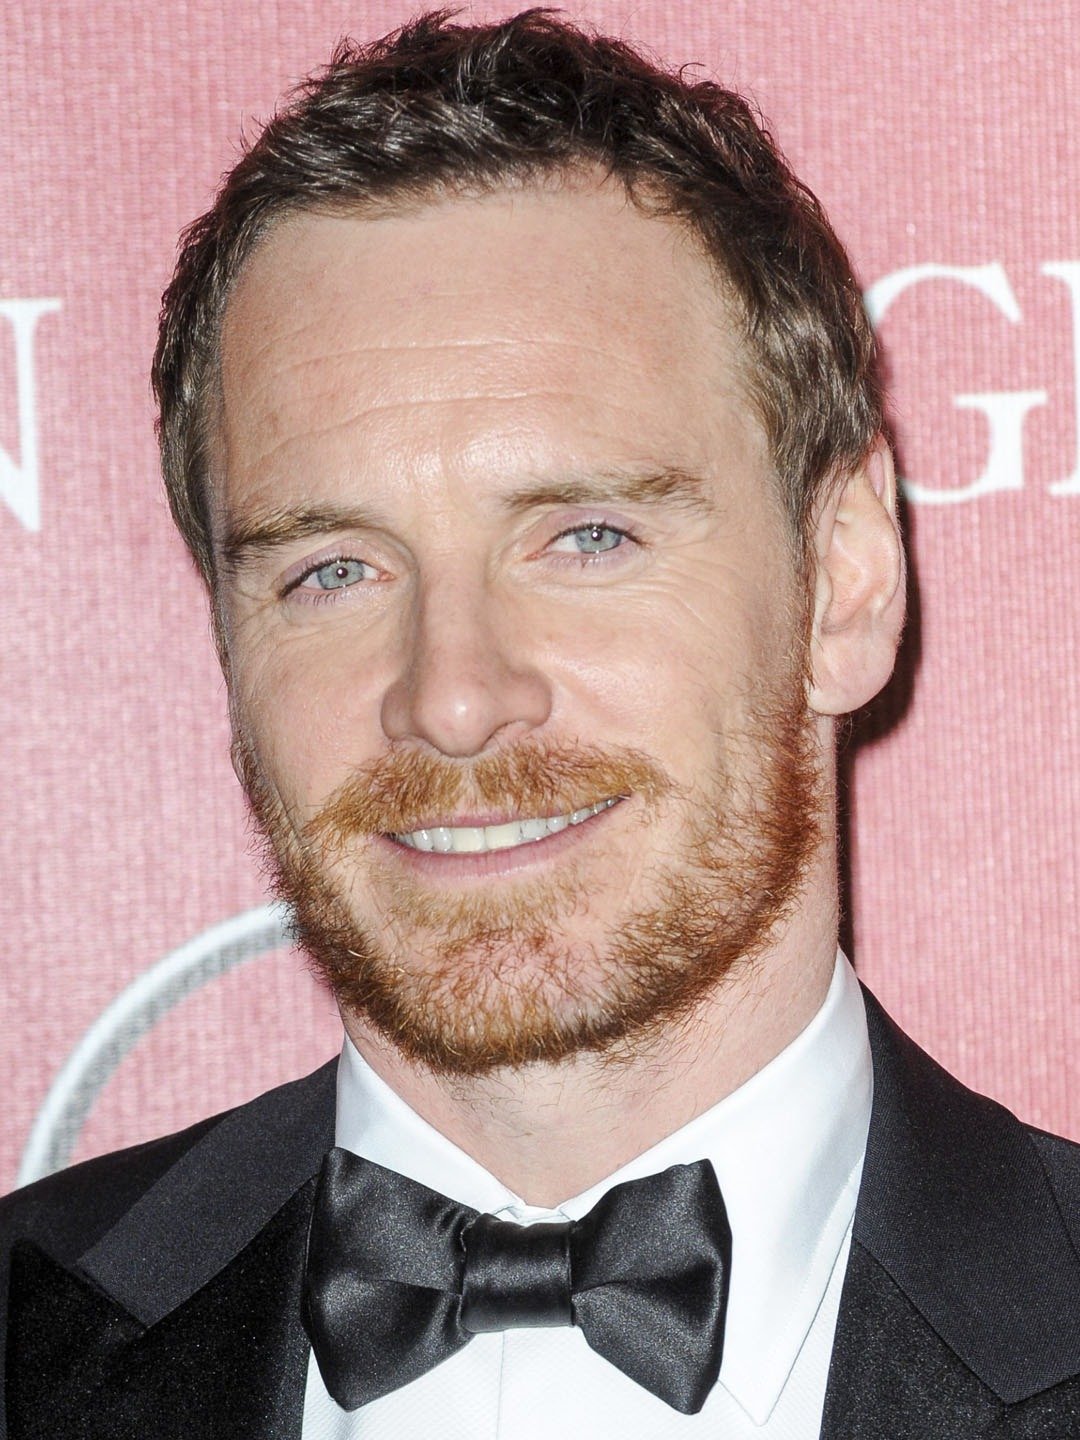 How tall is Michael Fassbender?